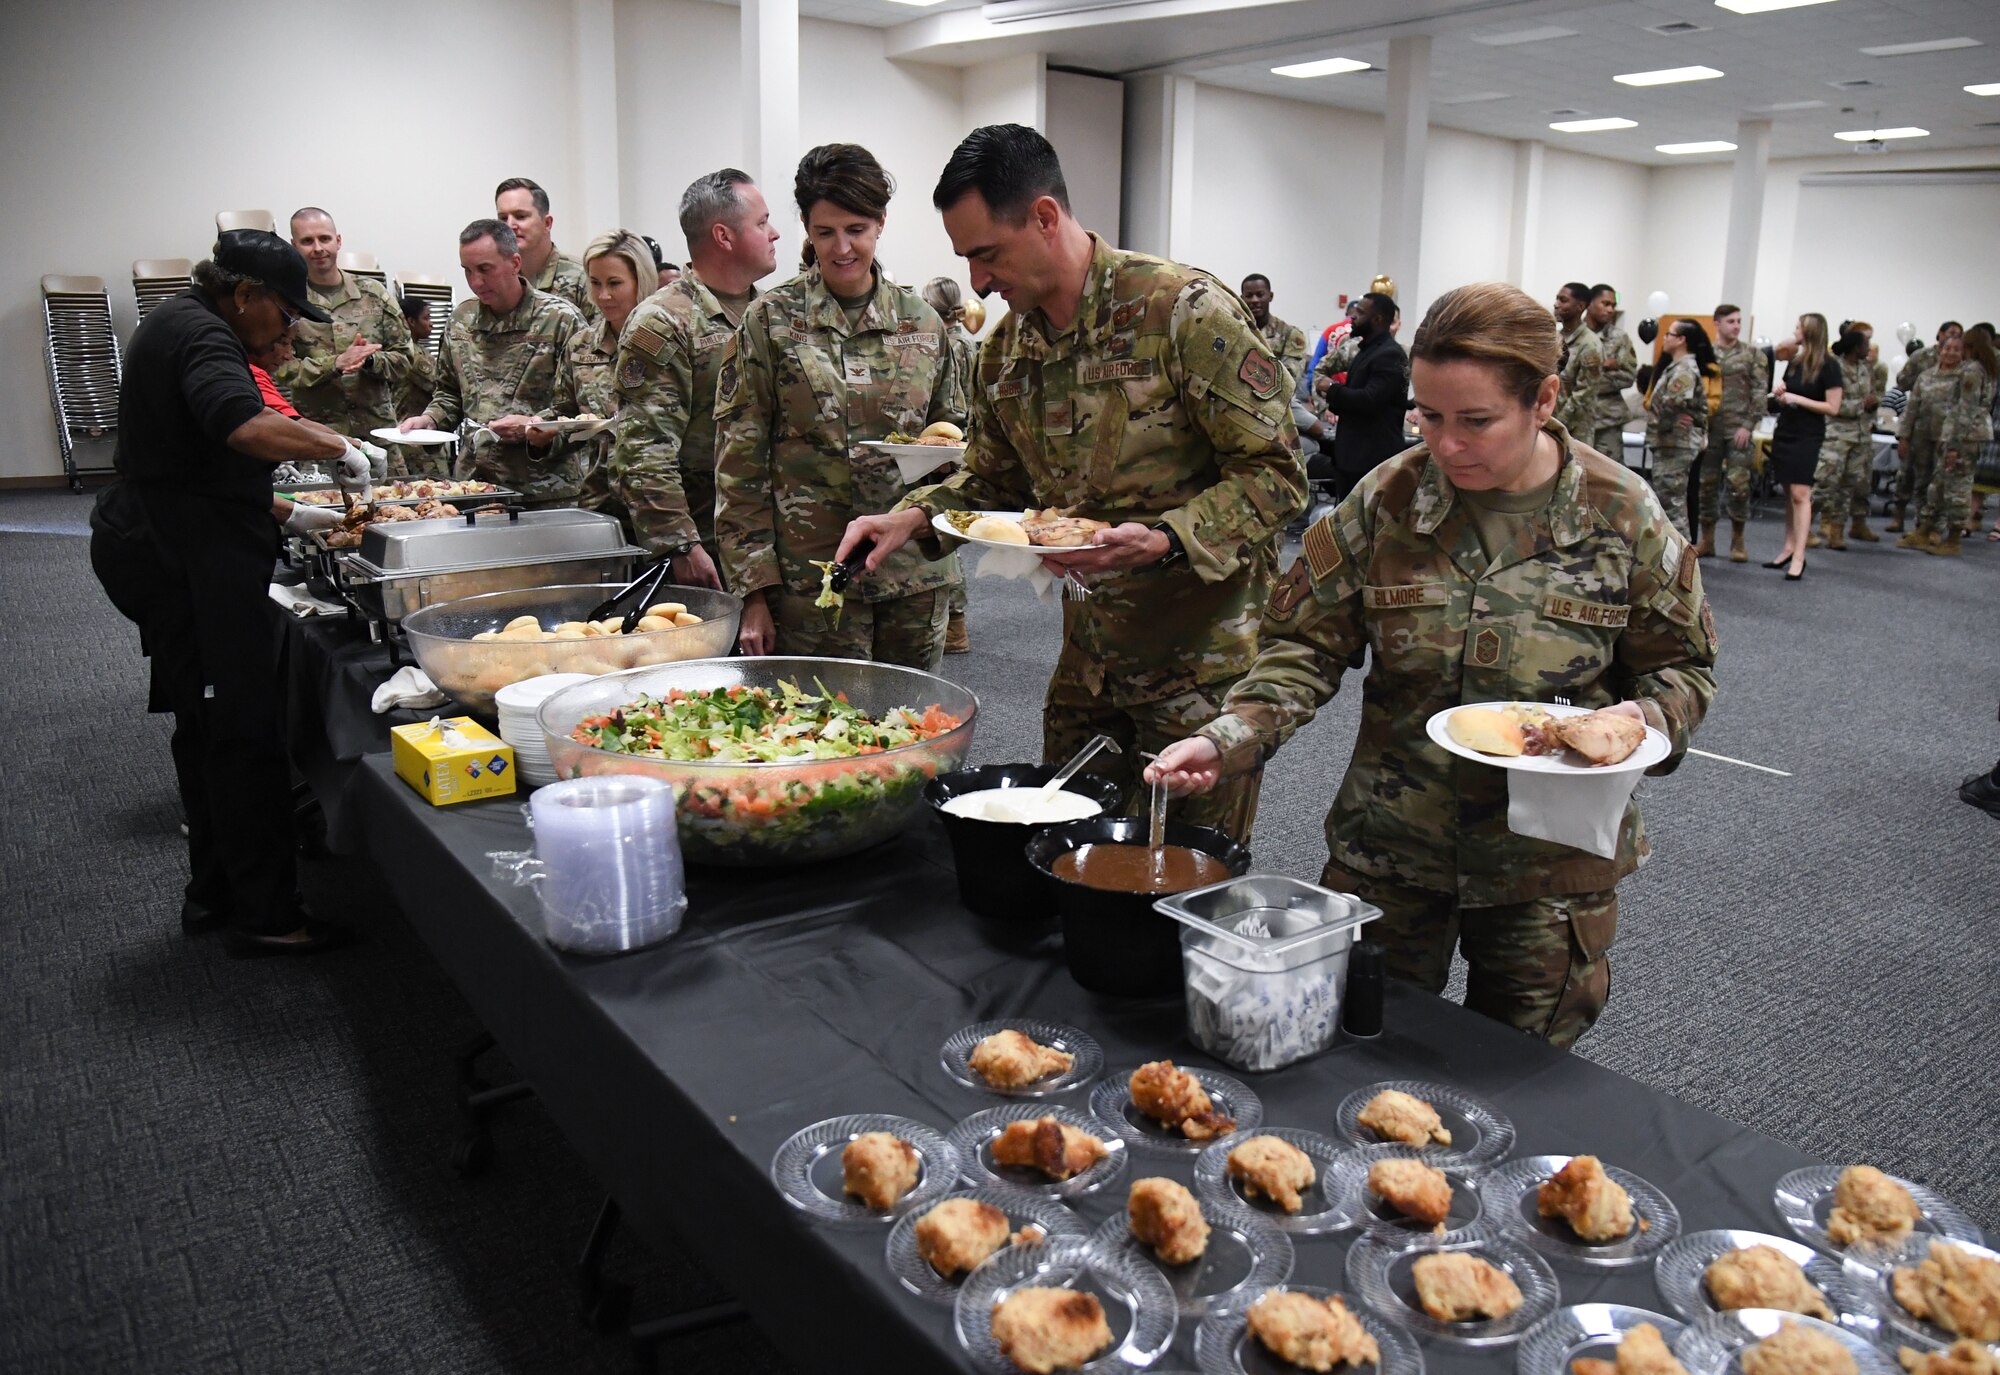 Keesler personnel attend the annual Dr. Martin Luther King Jr. Luncheon inside the Roberts Consolidated Aircraft Maintenance Facility at Keesler Air Force Base, Mississippi, Jan. 30, 2023.